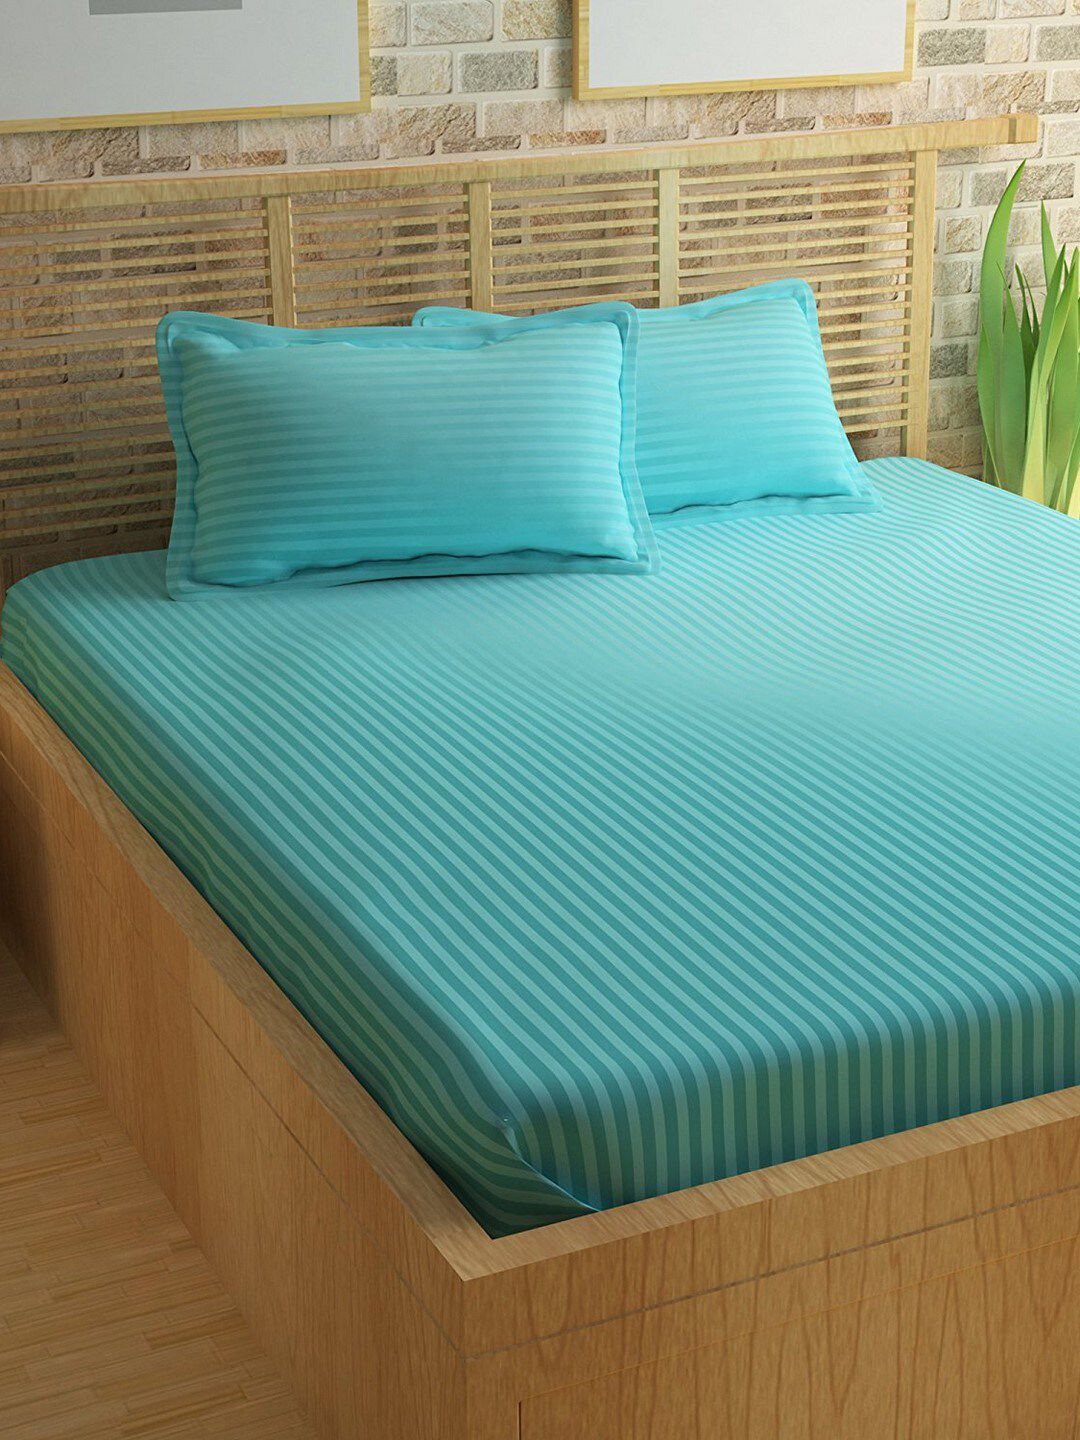 eCraftIndia Blue Striped 210 TC Cotton 1 King Bedsheet with 2 Pillow Covers Price in India